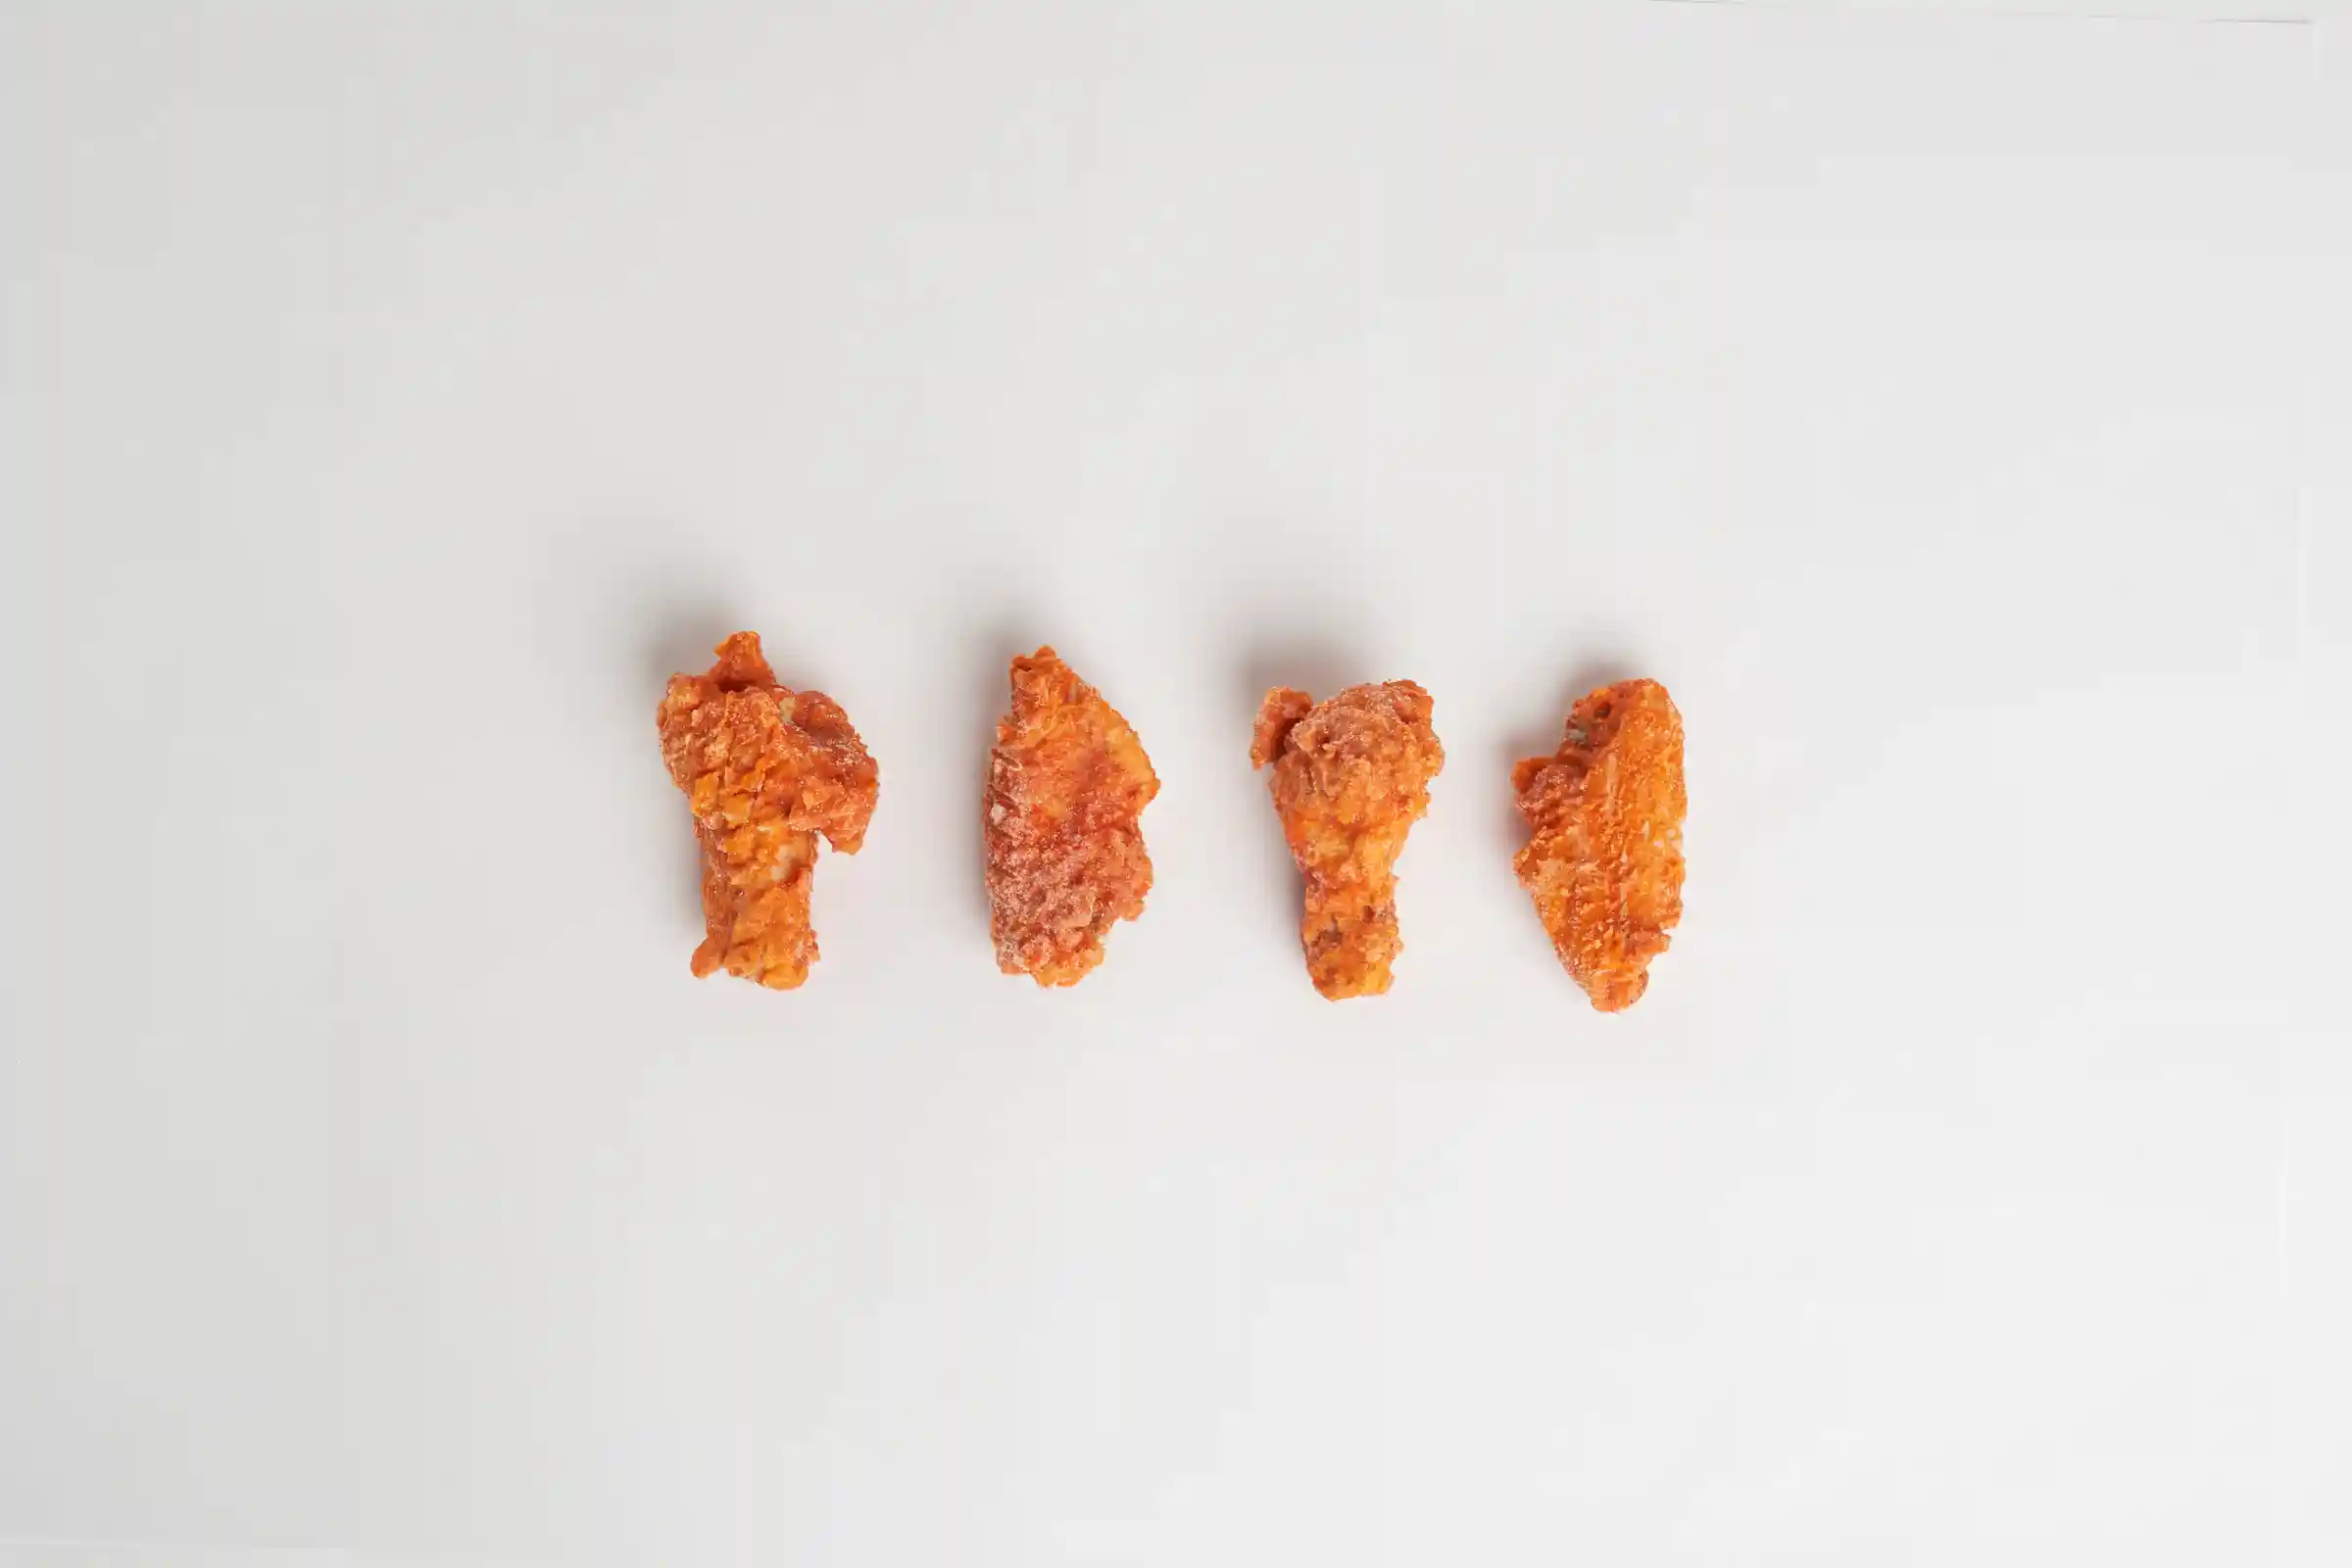 Tyson Red Label® Fully Cooked Breaded Authentically Crispy Spicy Bone-In Chicken Wing Sections, Smedium_image_11